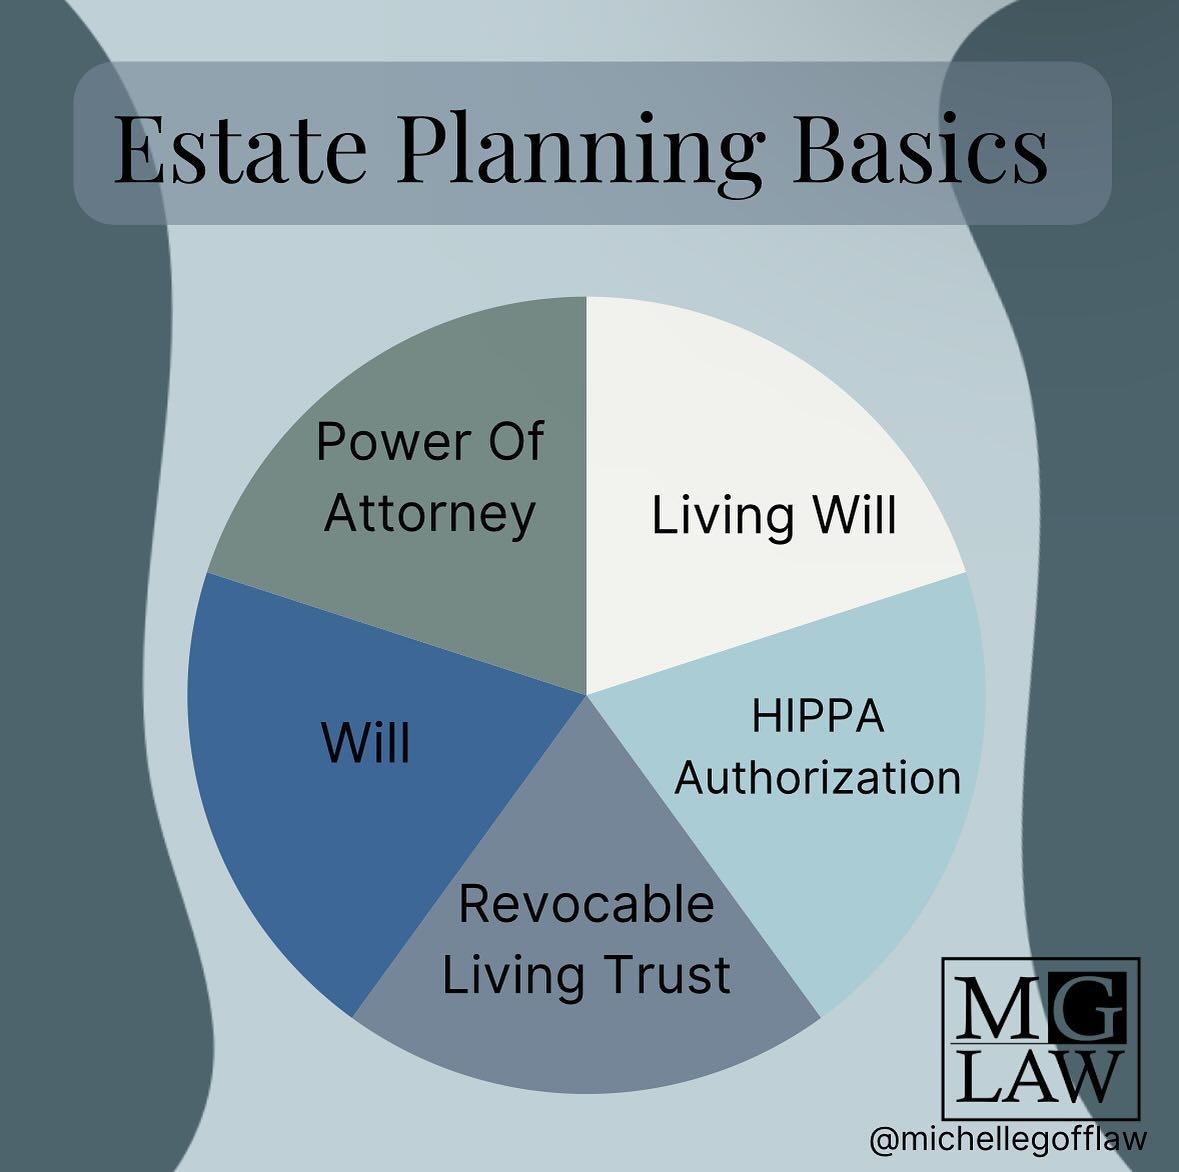 Understanding estate planning basics: Power of Attorney, Will, Living Will, HIPAA Authorization, Revocable Trust. These key documents are essential for securing your future and ensuring your wishes are honored. Let&rsquo;s discuss your estate plan to